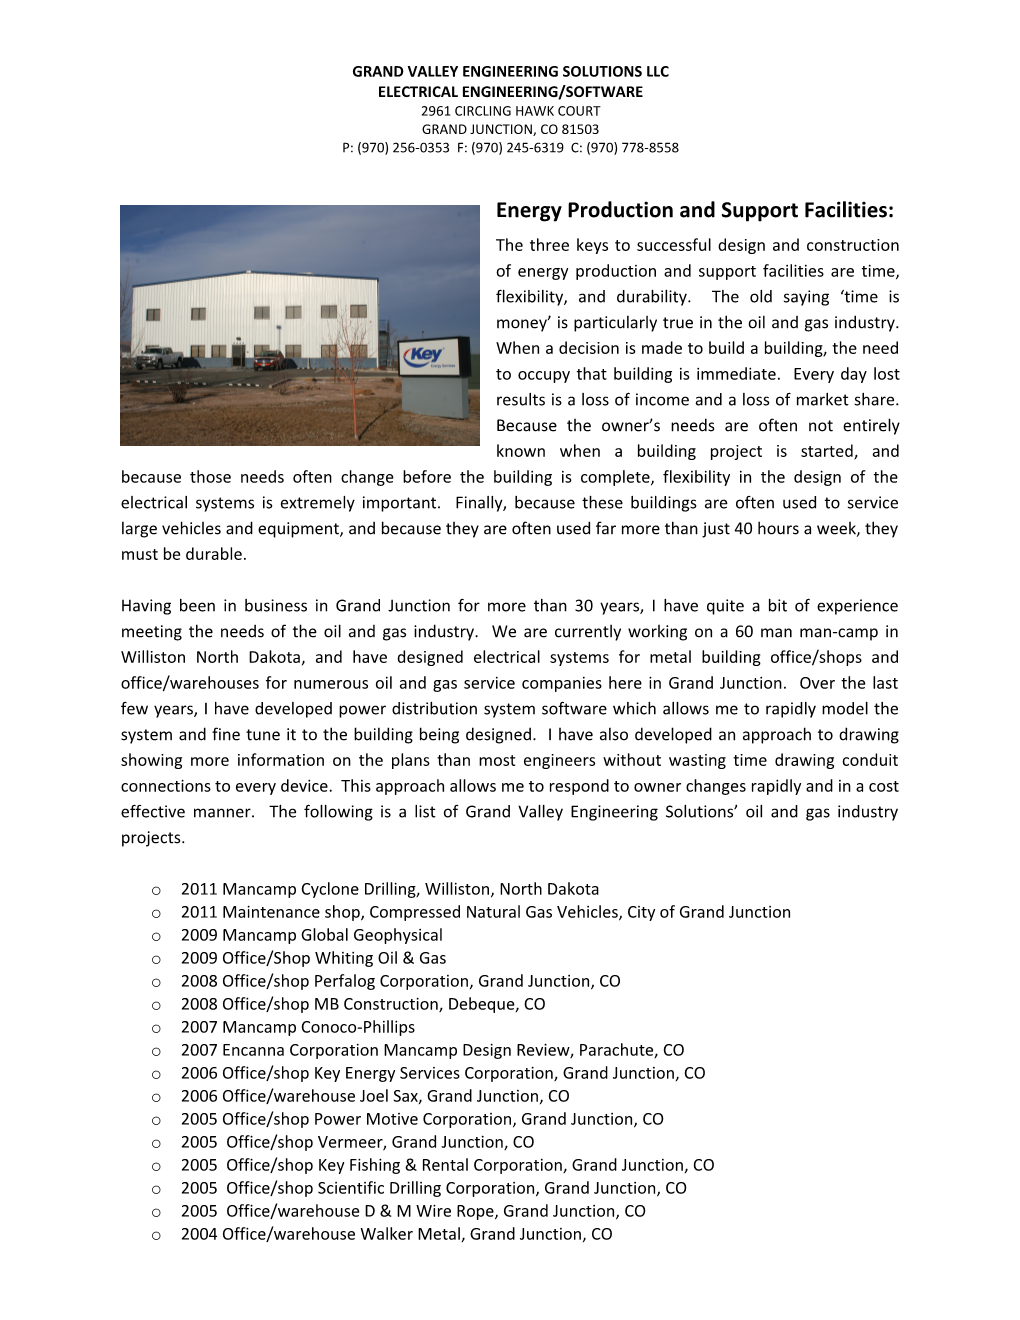 Energy Production and Support Facilities